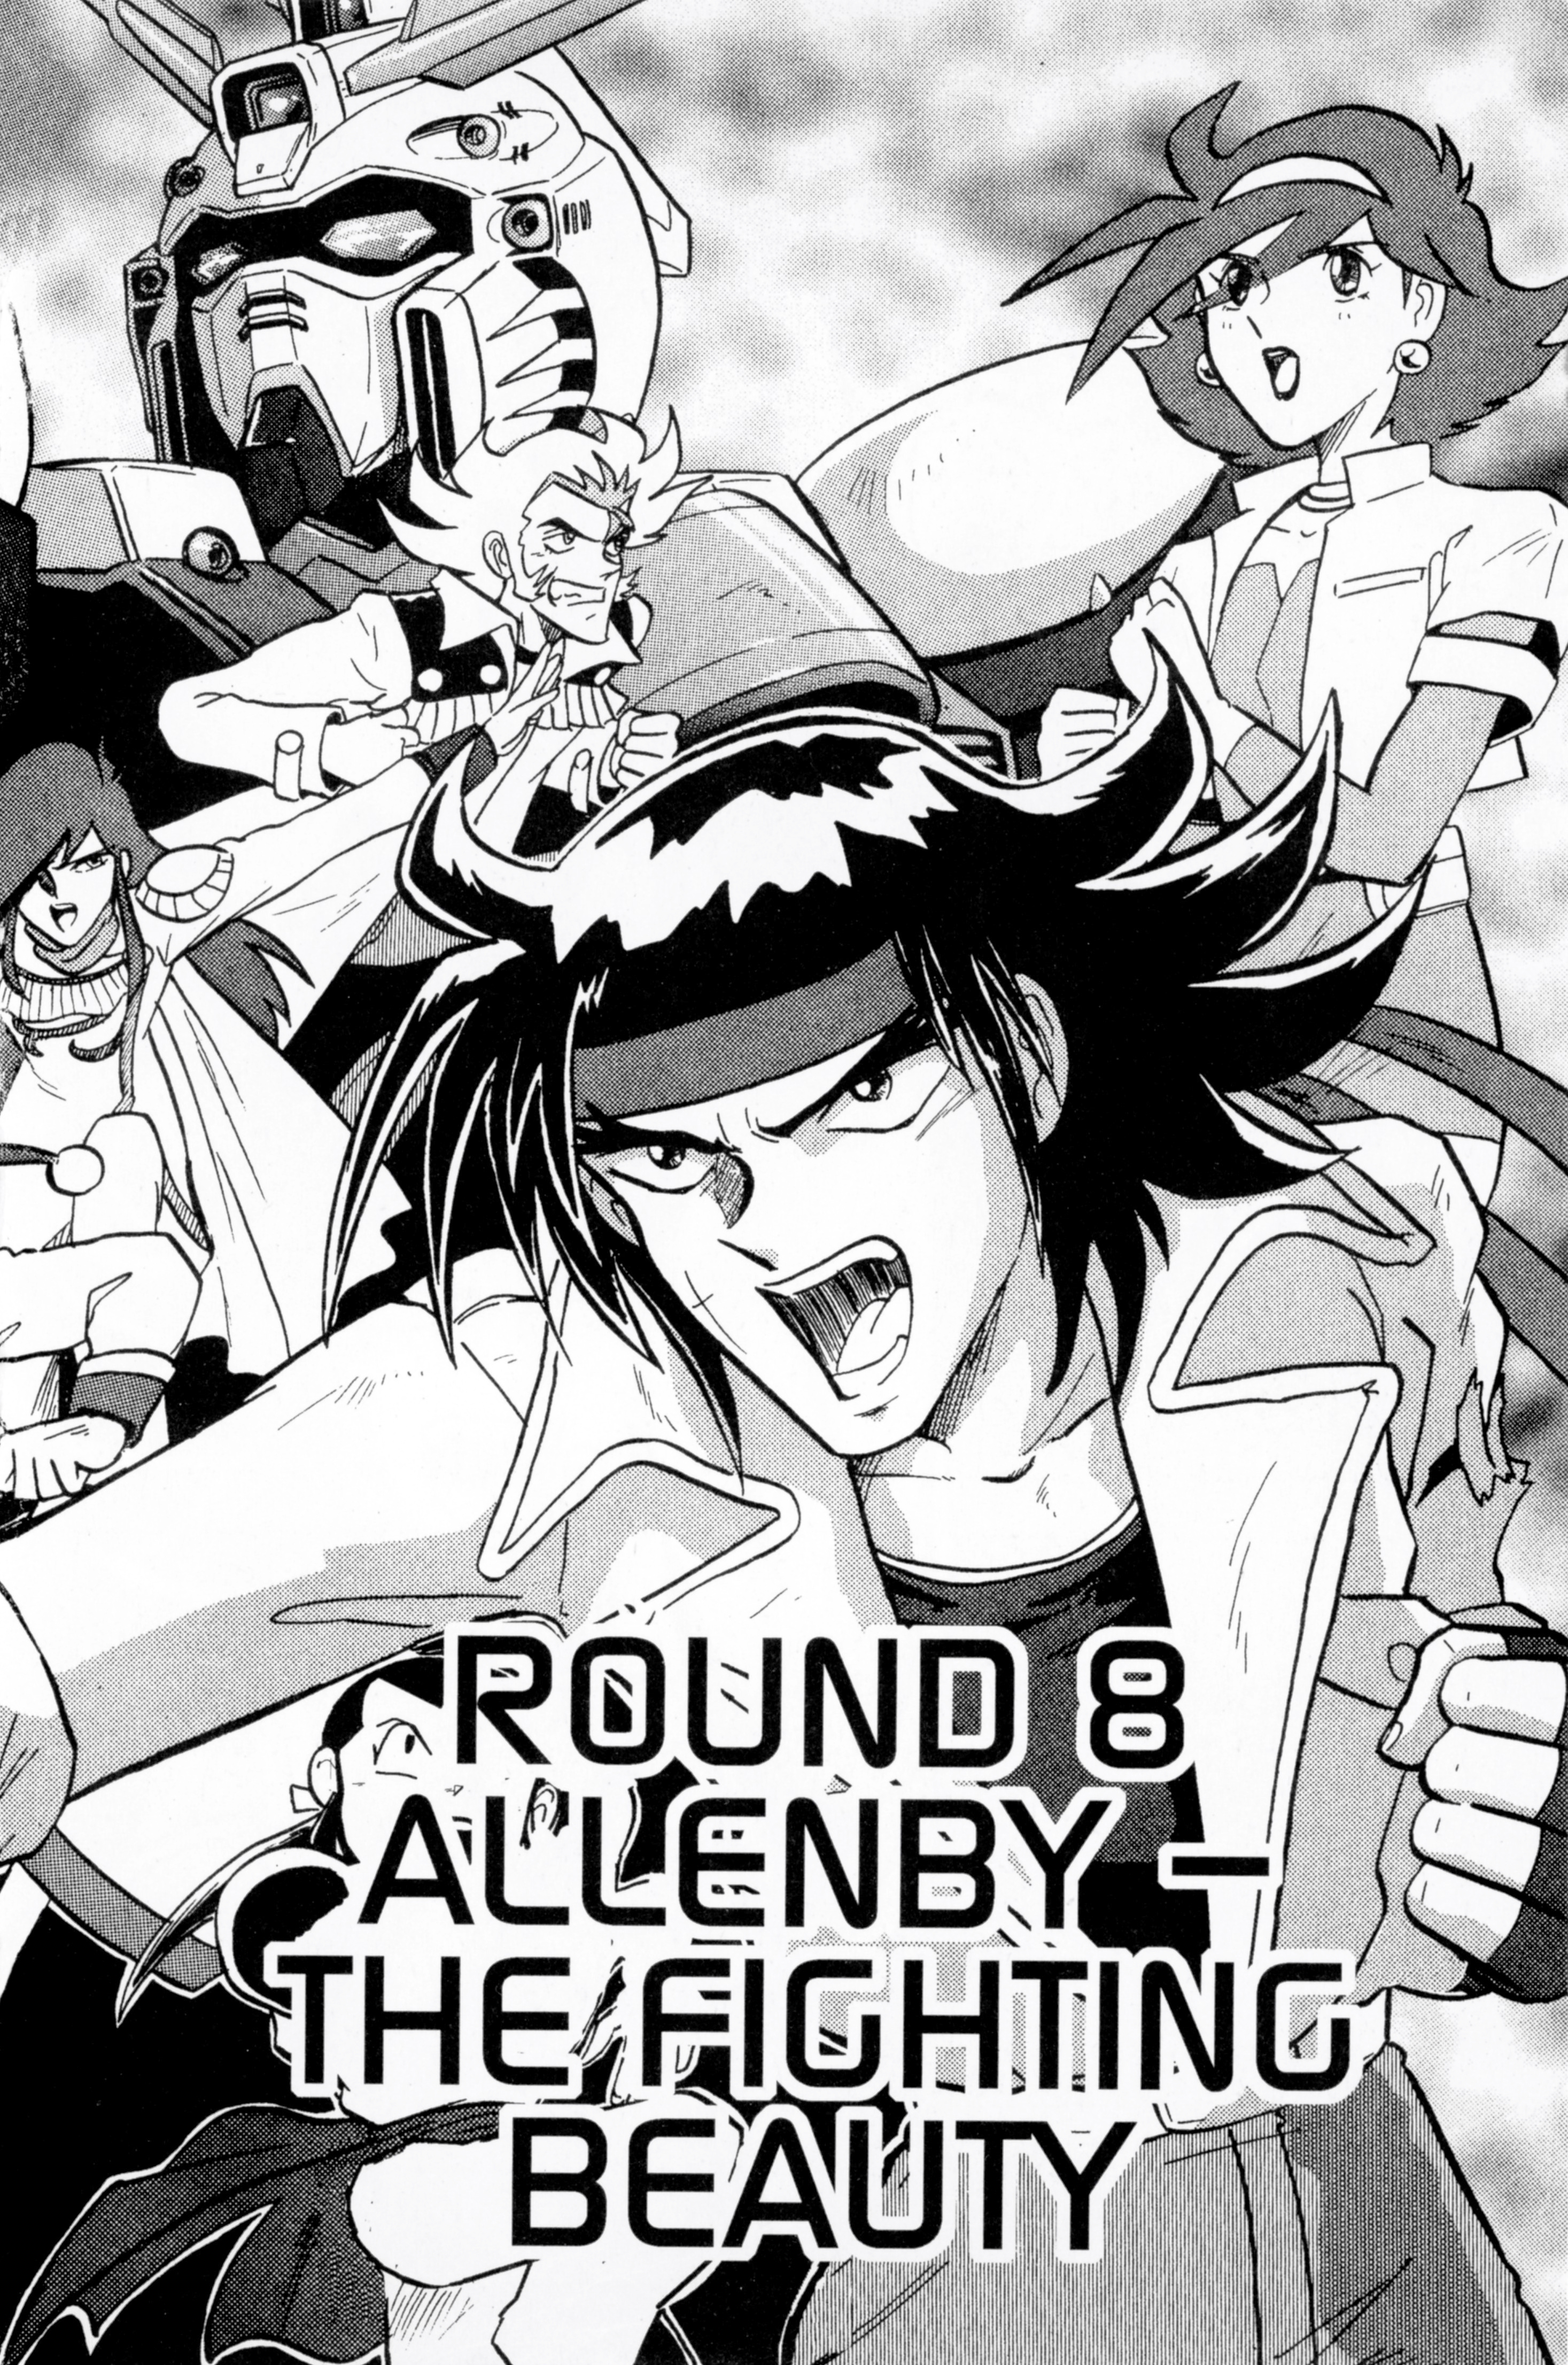 Mobile Fighter G Gundam Vol.2 Chapter 8: Allenby - The Fighting Beauty - Picture 1